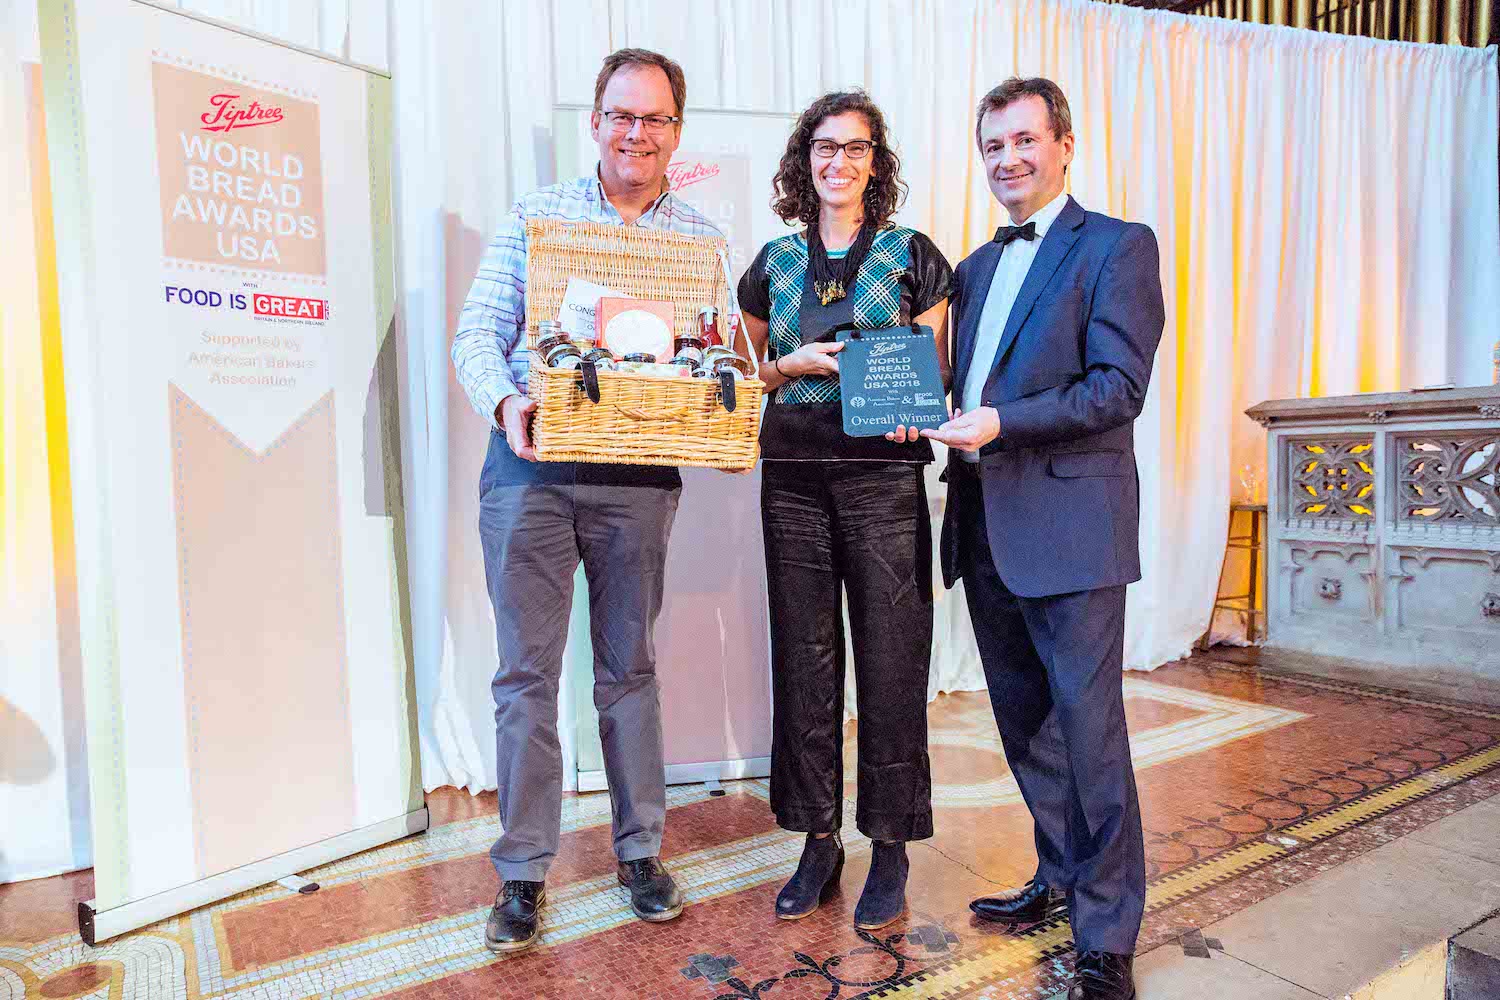 Tiptree World Bread Awards with Food is GREAT winner Sarah Owens of Ritual Fine Foods, Queens.